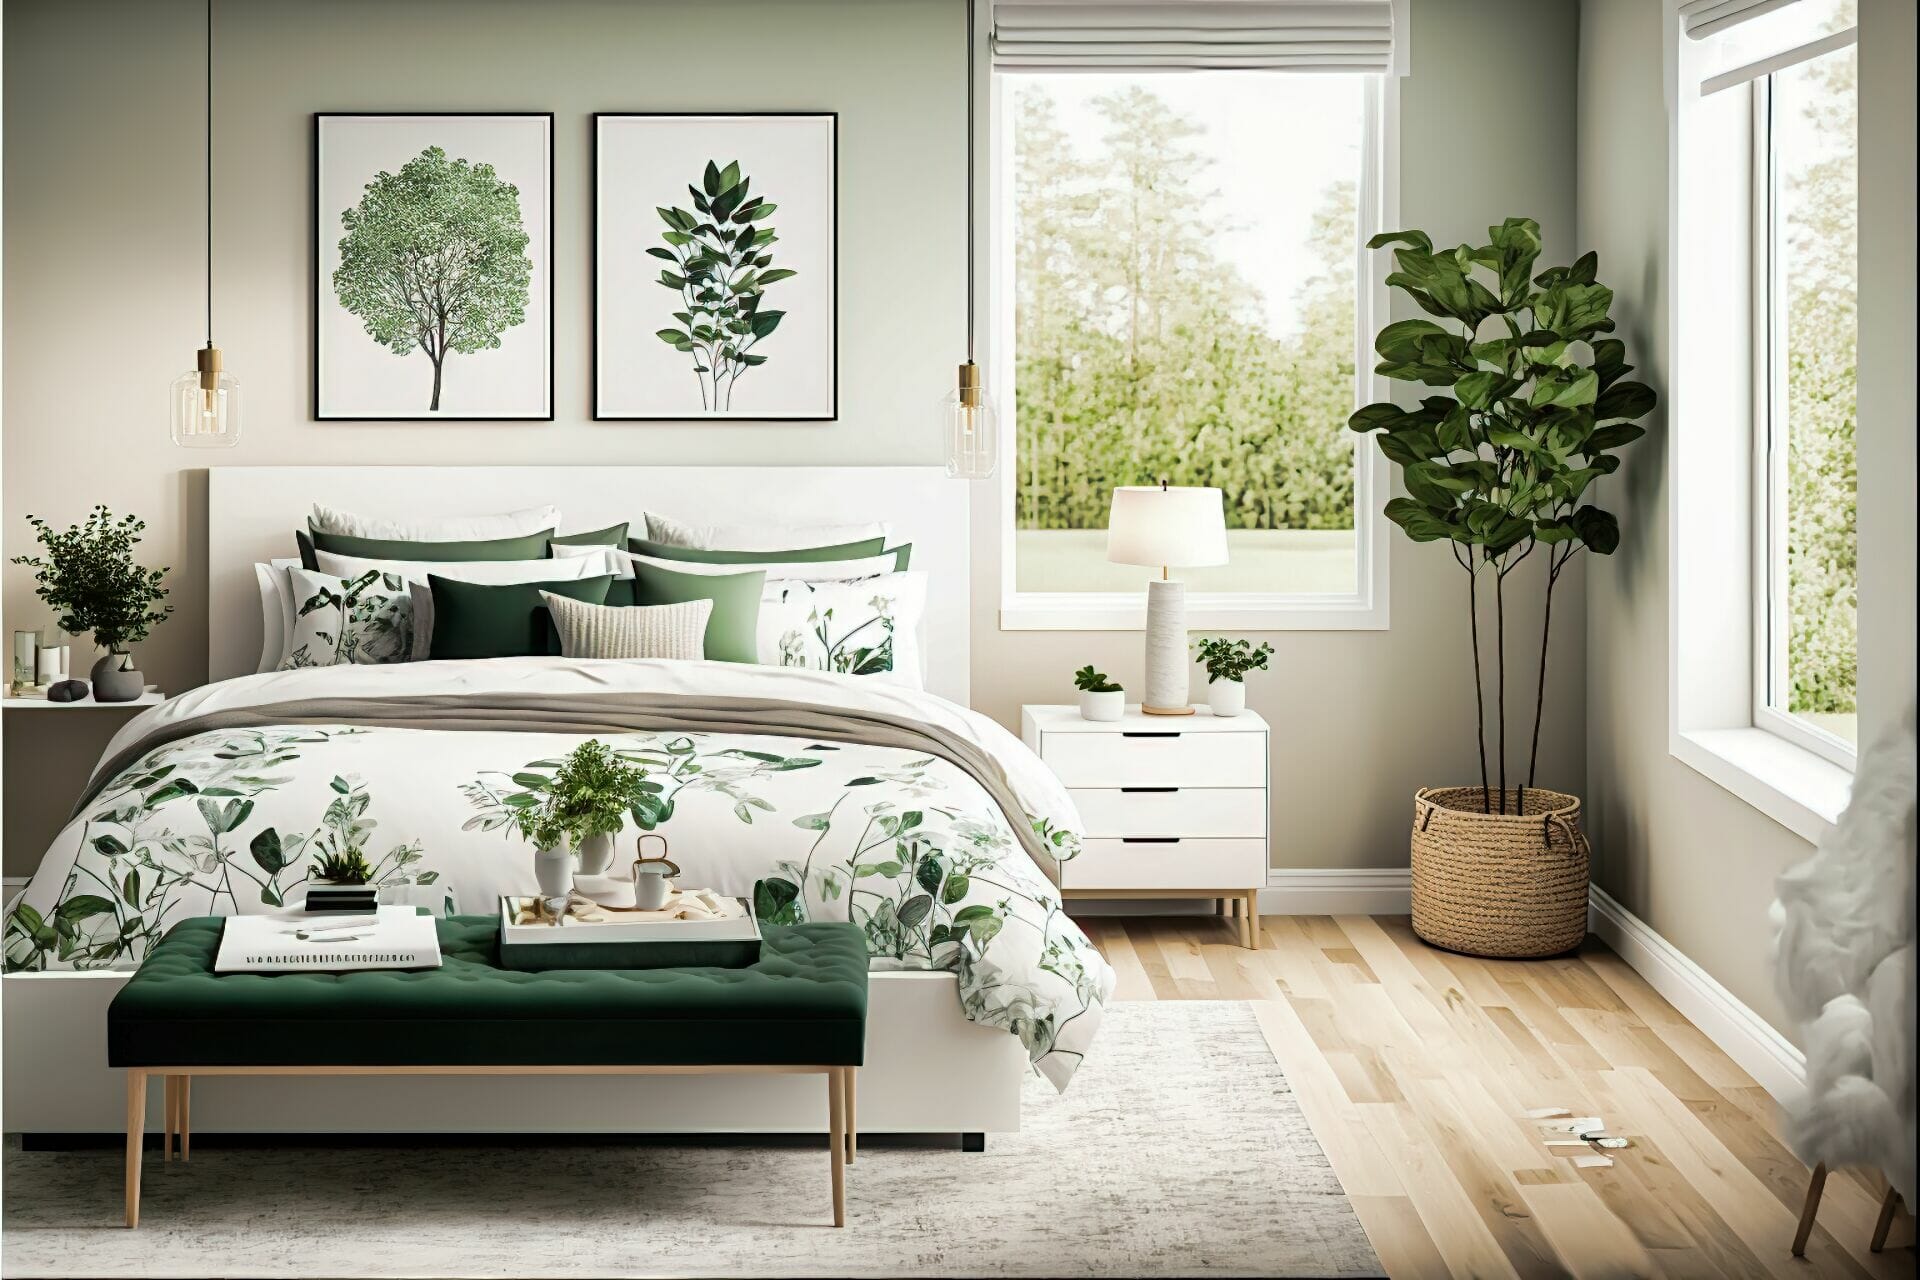 A Scandinavian Style Bedroom With Organic Touches - This Tranquil Bedroom Features A White And Green Color Palette, With Light Wood Floors And A Wall Of Windows For Natural Light. A White Bed Frame Is Paired With A White Headboard And Sleek Nightstands, While A Patterned Area Rug And Natural Accents Create A Soothing Atmosphere.